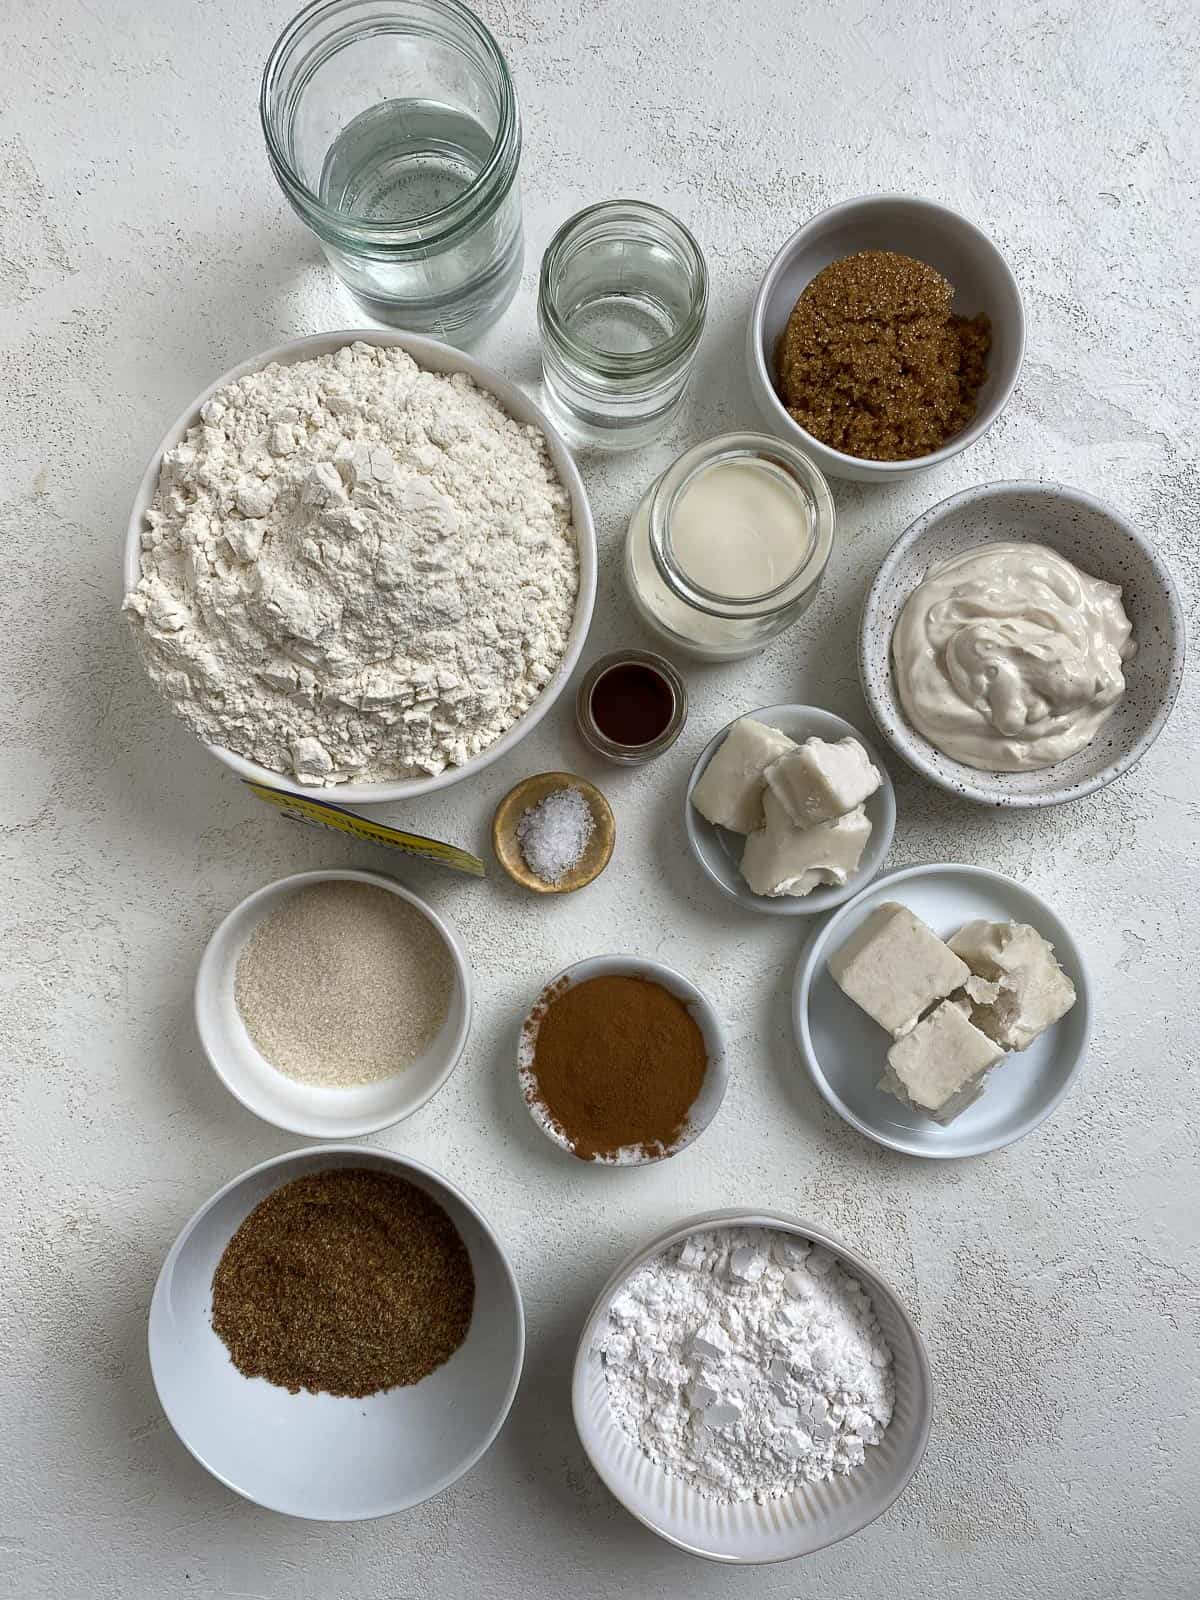 ingredients for These Homemade Vegan Cinnamon Rolls spread out on a white surface